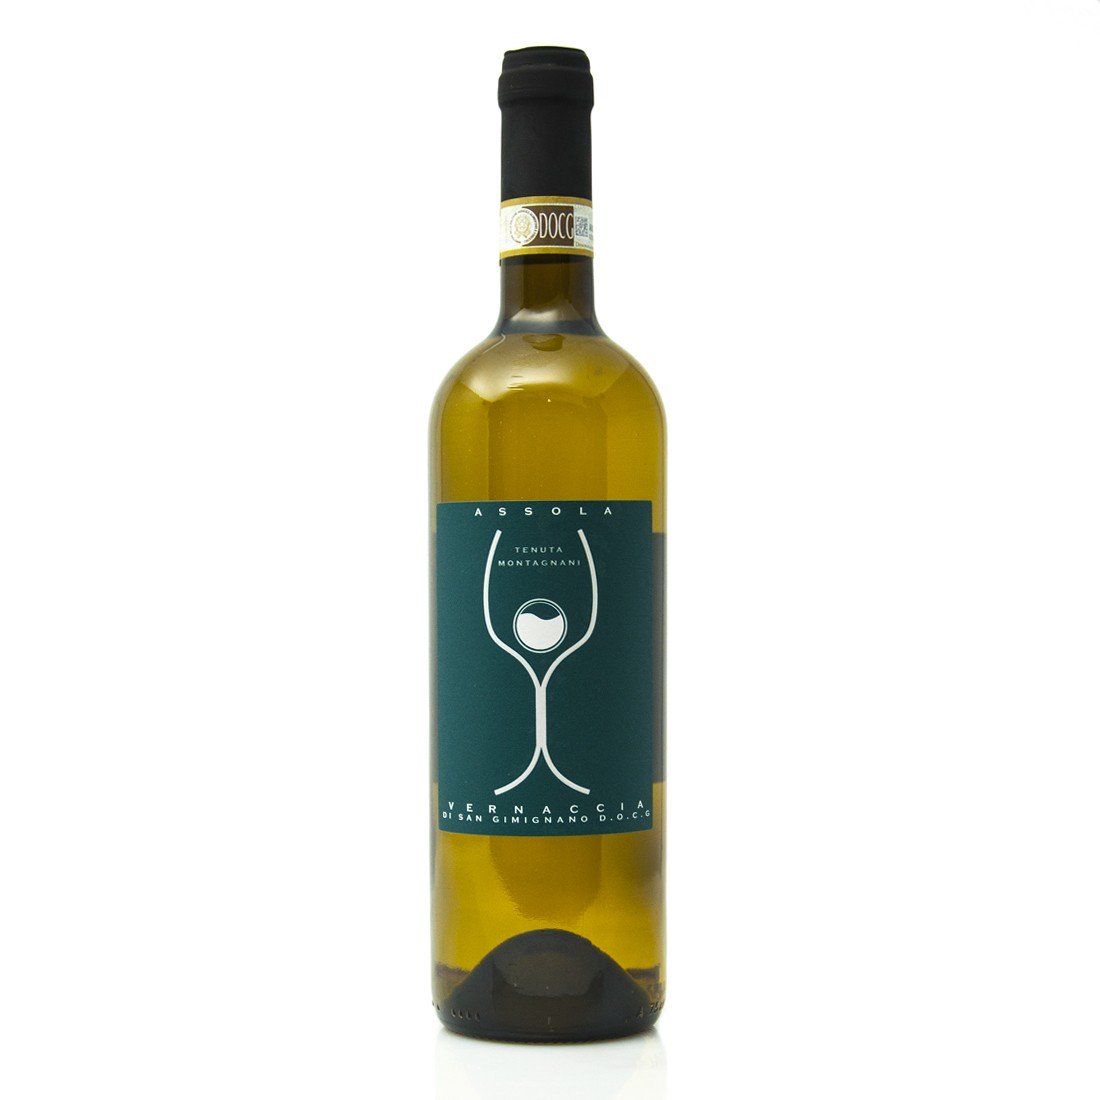 An Amazing Vernaccia, Born From an Ancient Passion